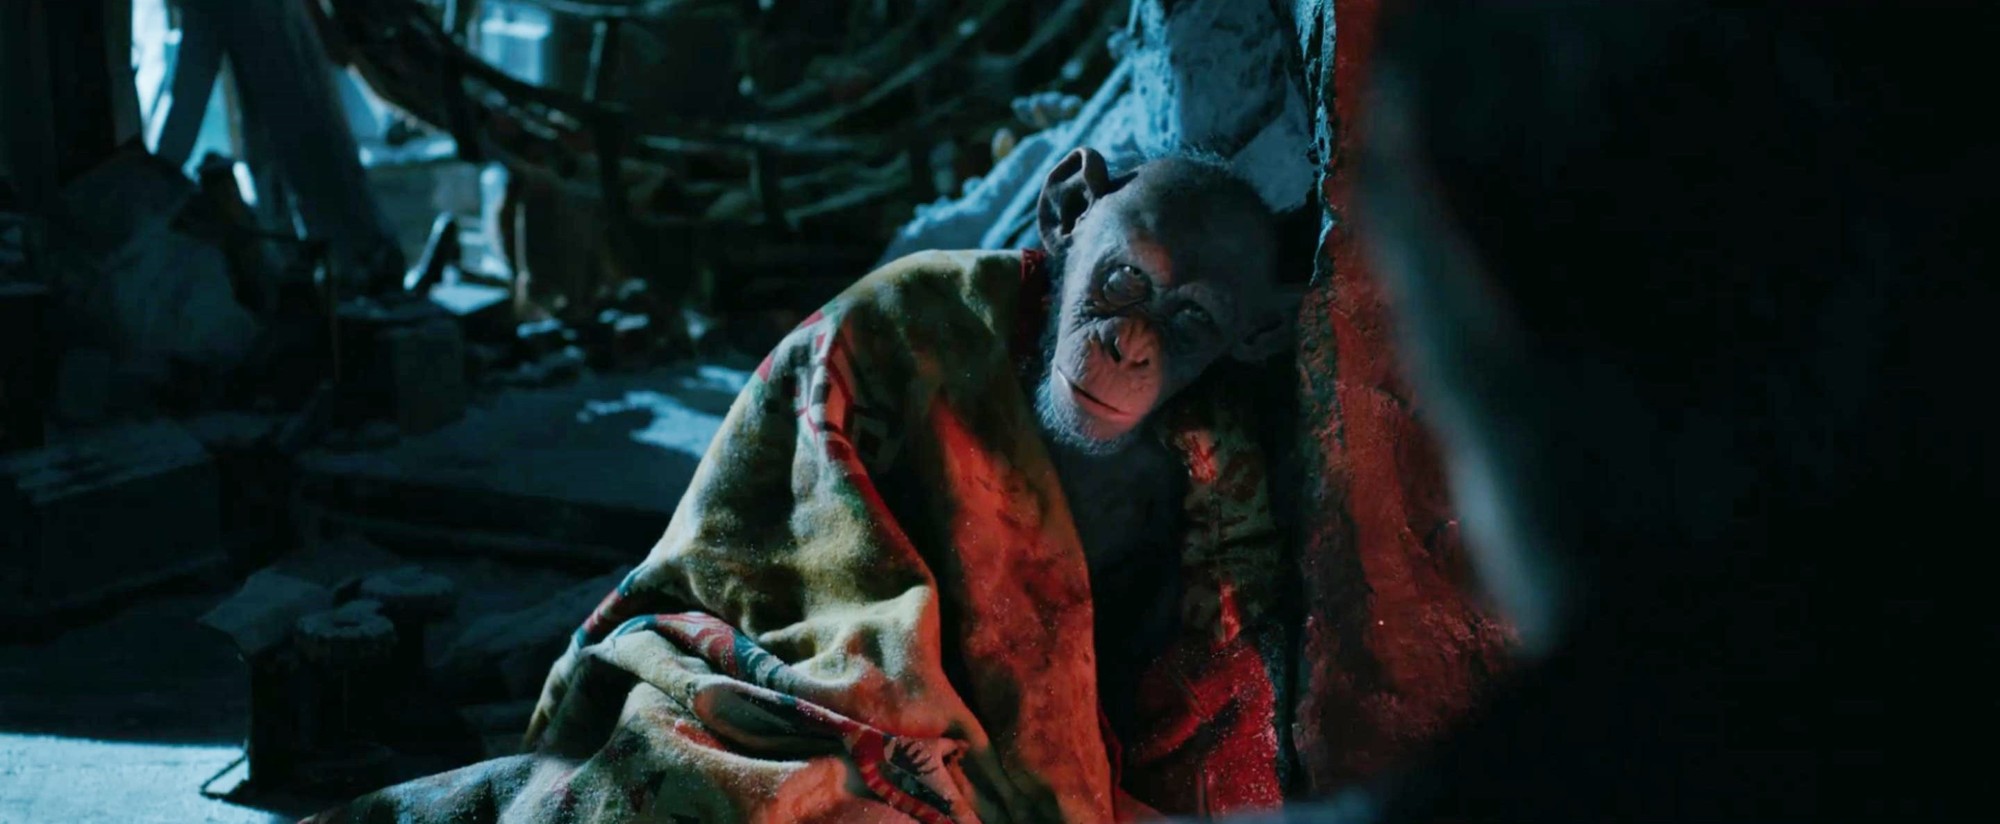 Bad Ape from 20th Century Fox's War for the Planet of the Apes (2017)